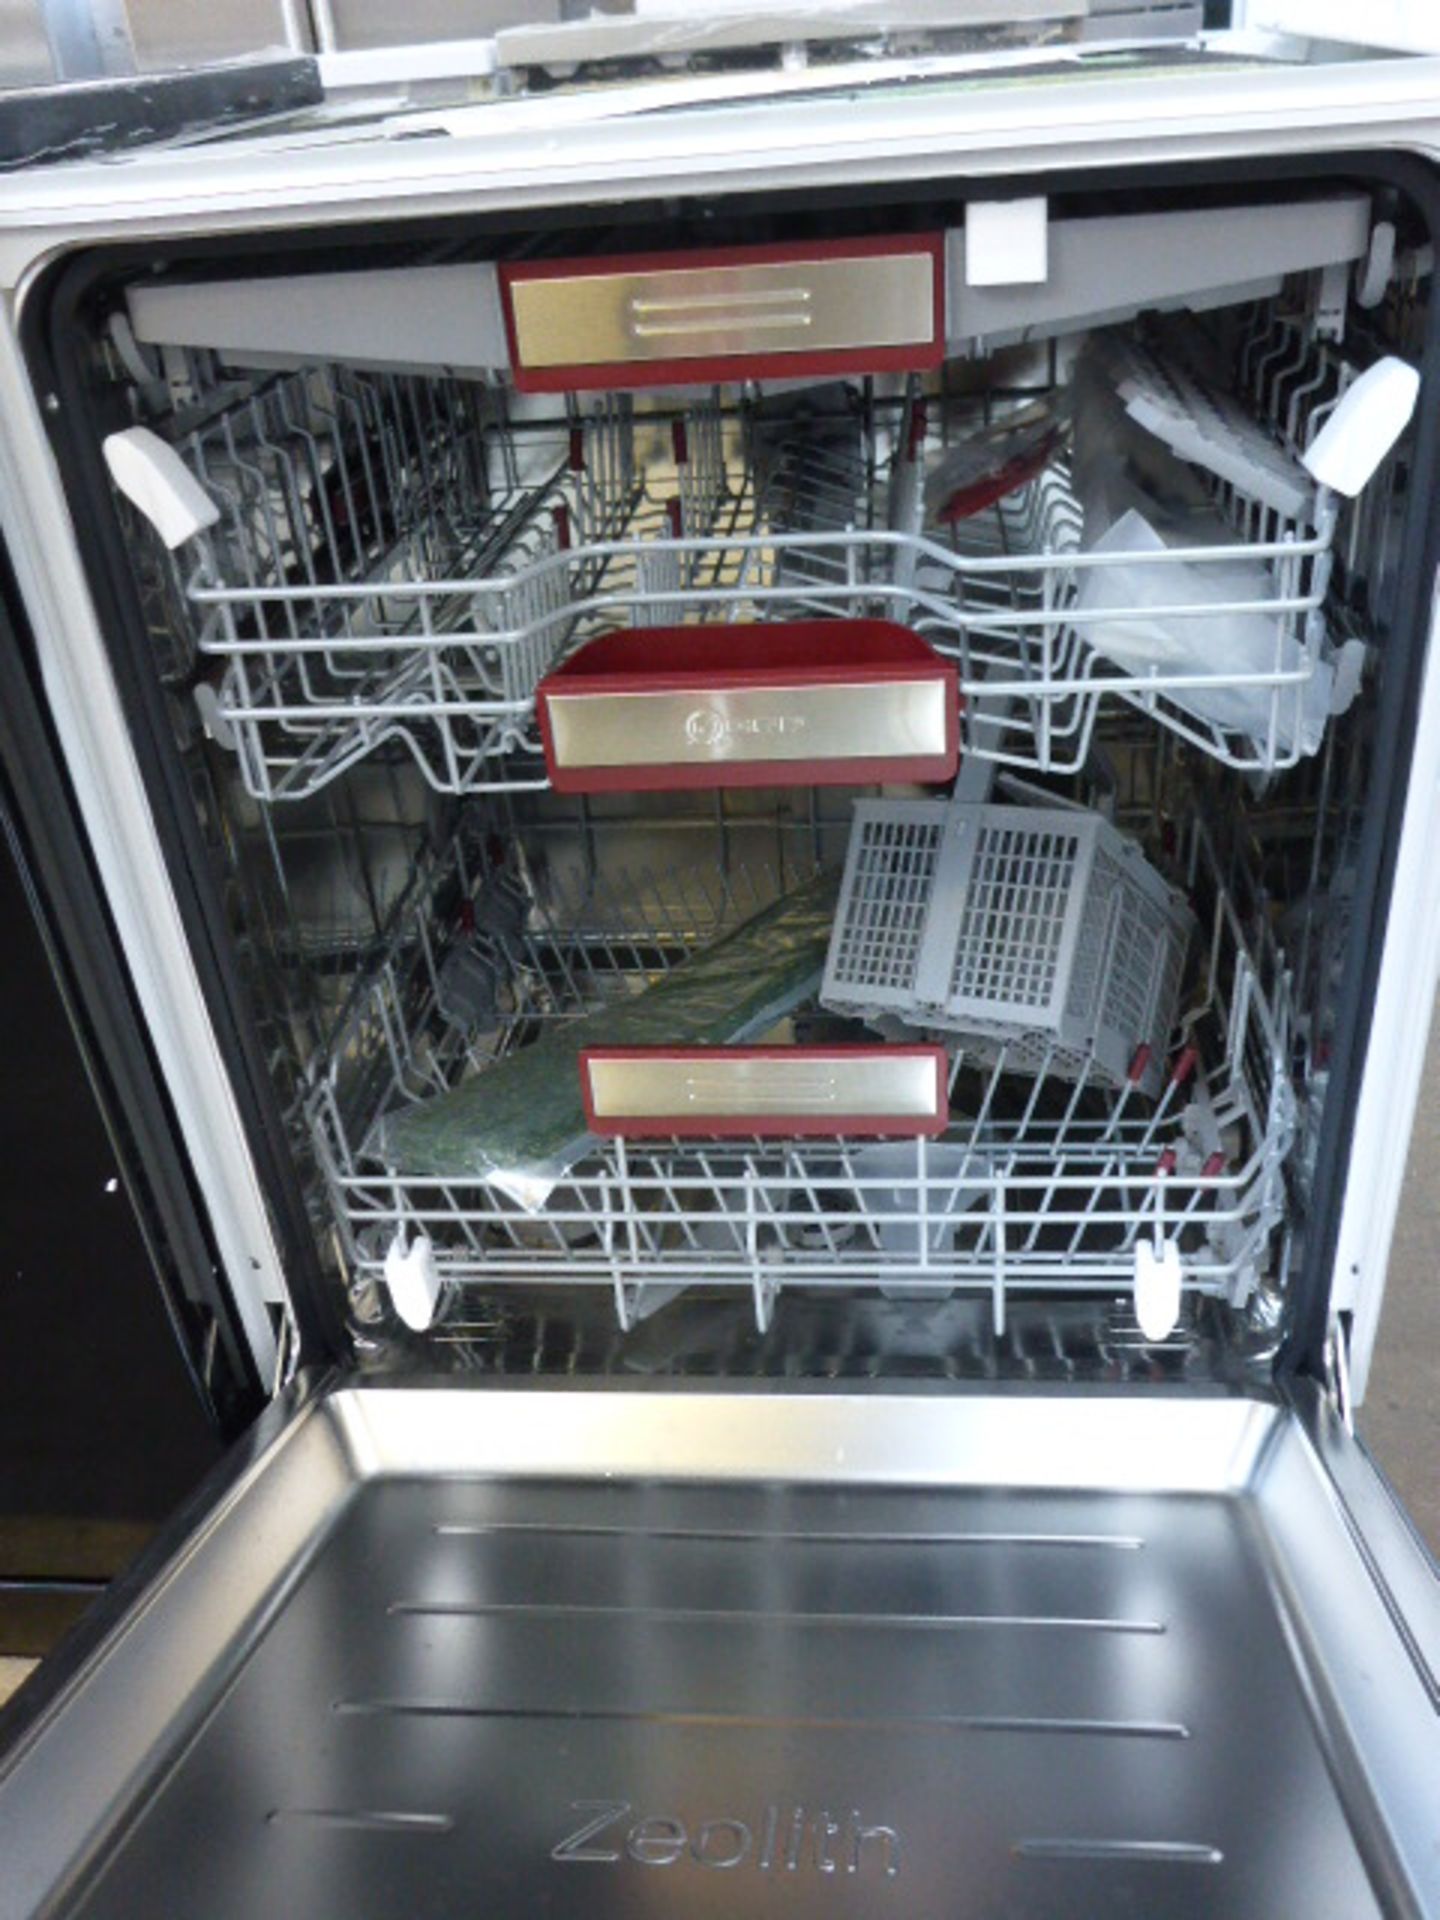 S517T80D6EB Neff Dishwasher fully integrated - Image 2 of 2